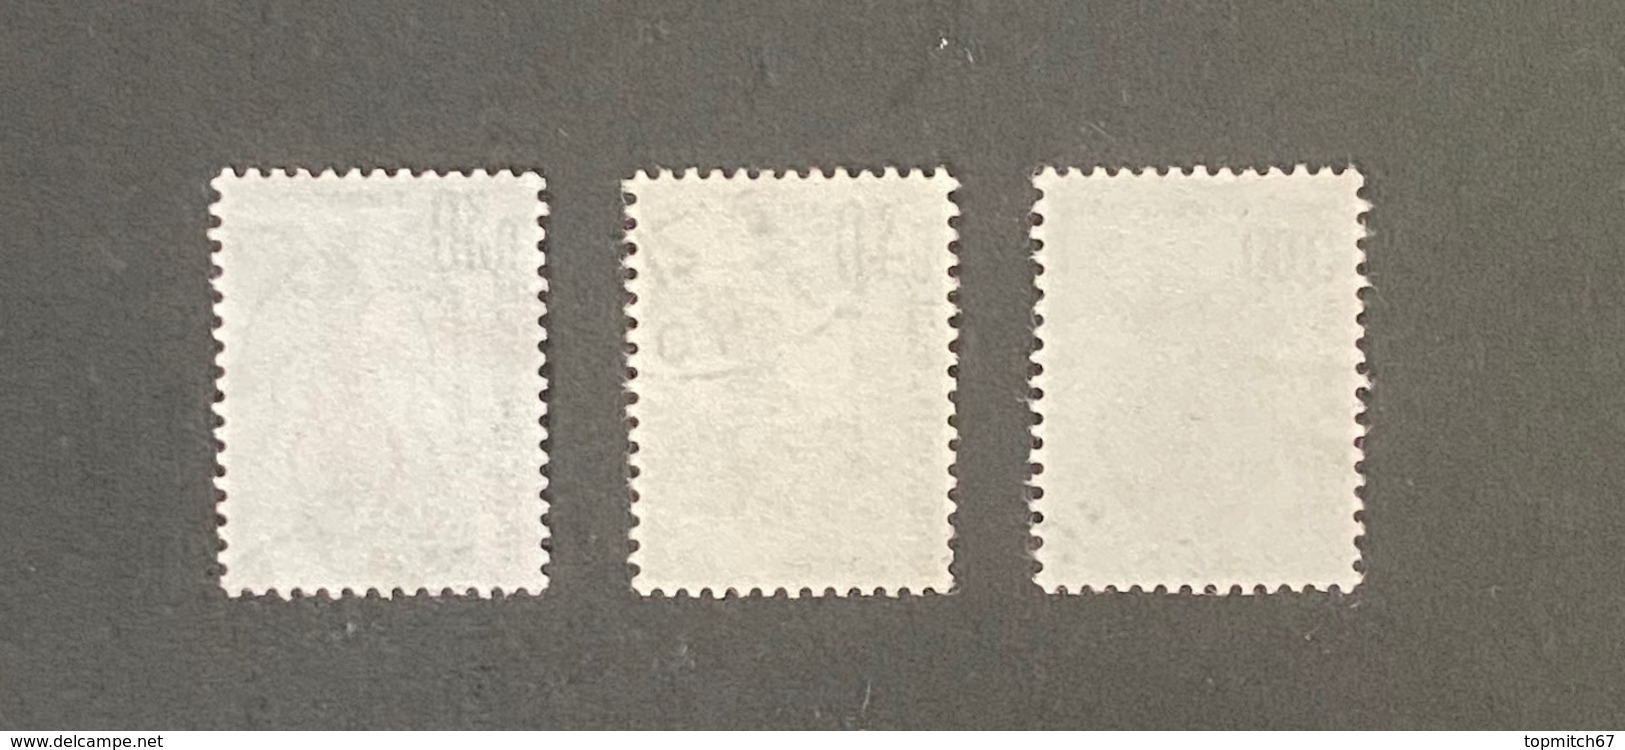 FRAYX109-11U - Timbres Taxe Insectes Coléoptères (I) Set Of 3 Used Stamps 1983 - France YT YX 109-11 - Marche Da Bollo